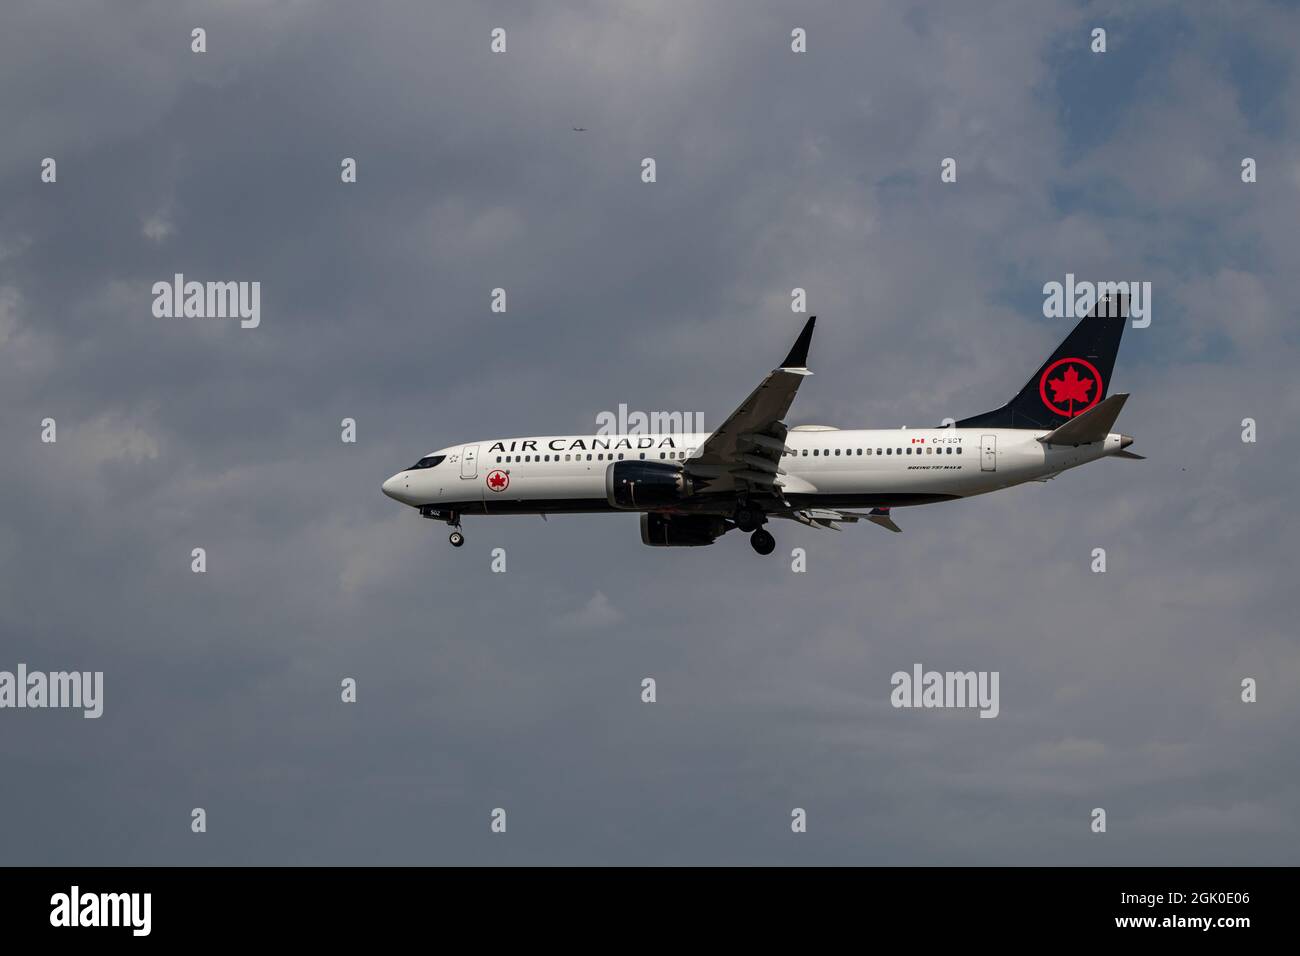 Montreal, Quebec, Canada - 05 26 2021: An Air Canada 737 MAX8 landing in Montreal. Stock Photo